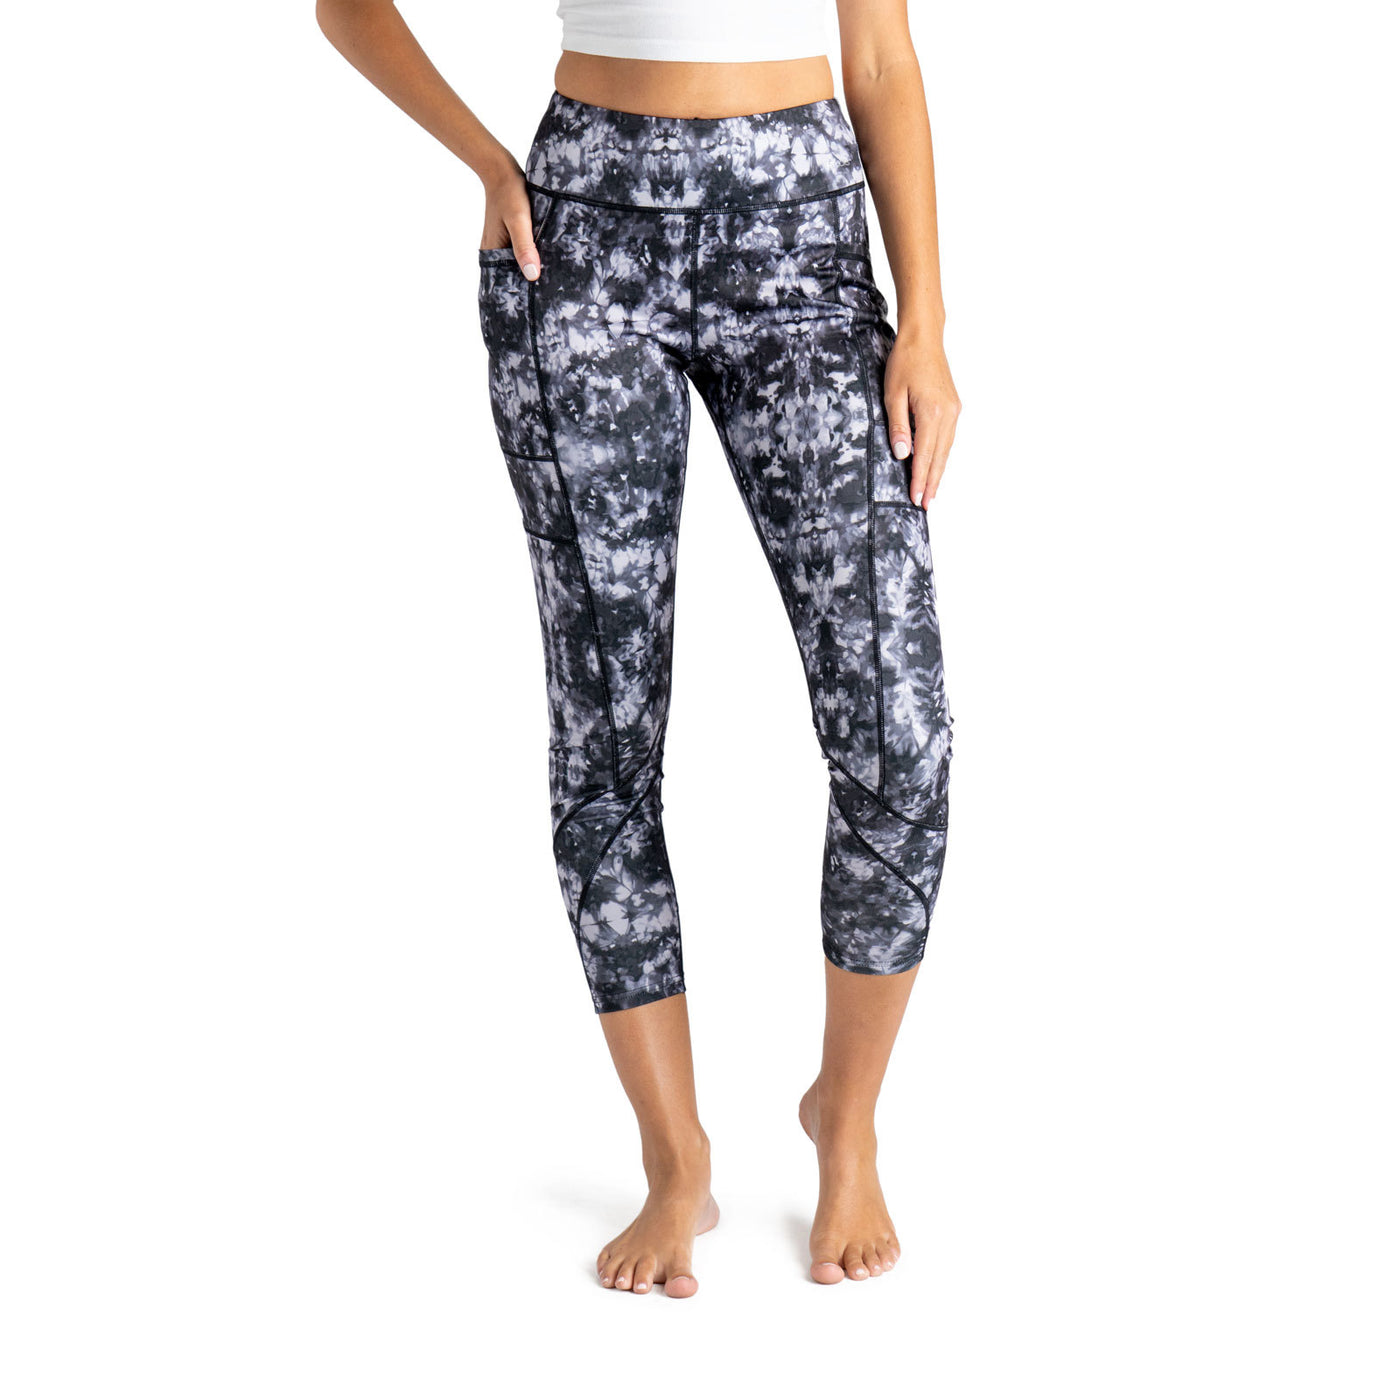 FitKicks Crossovers Twilight Leggings-330 Lounge-DM Merchandising-Market Street Nest, Fashionable Clothing, Shoes and Home Décor Located in Mabank, TX